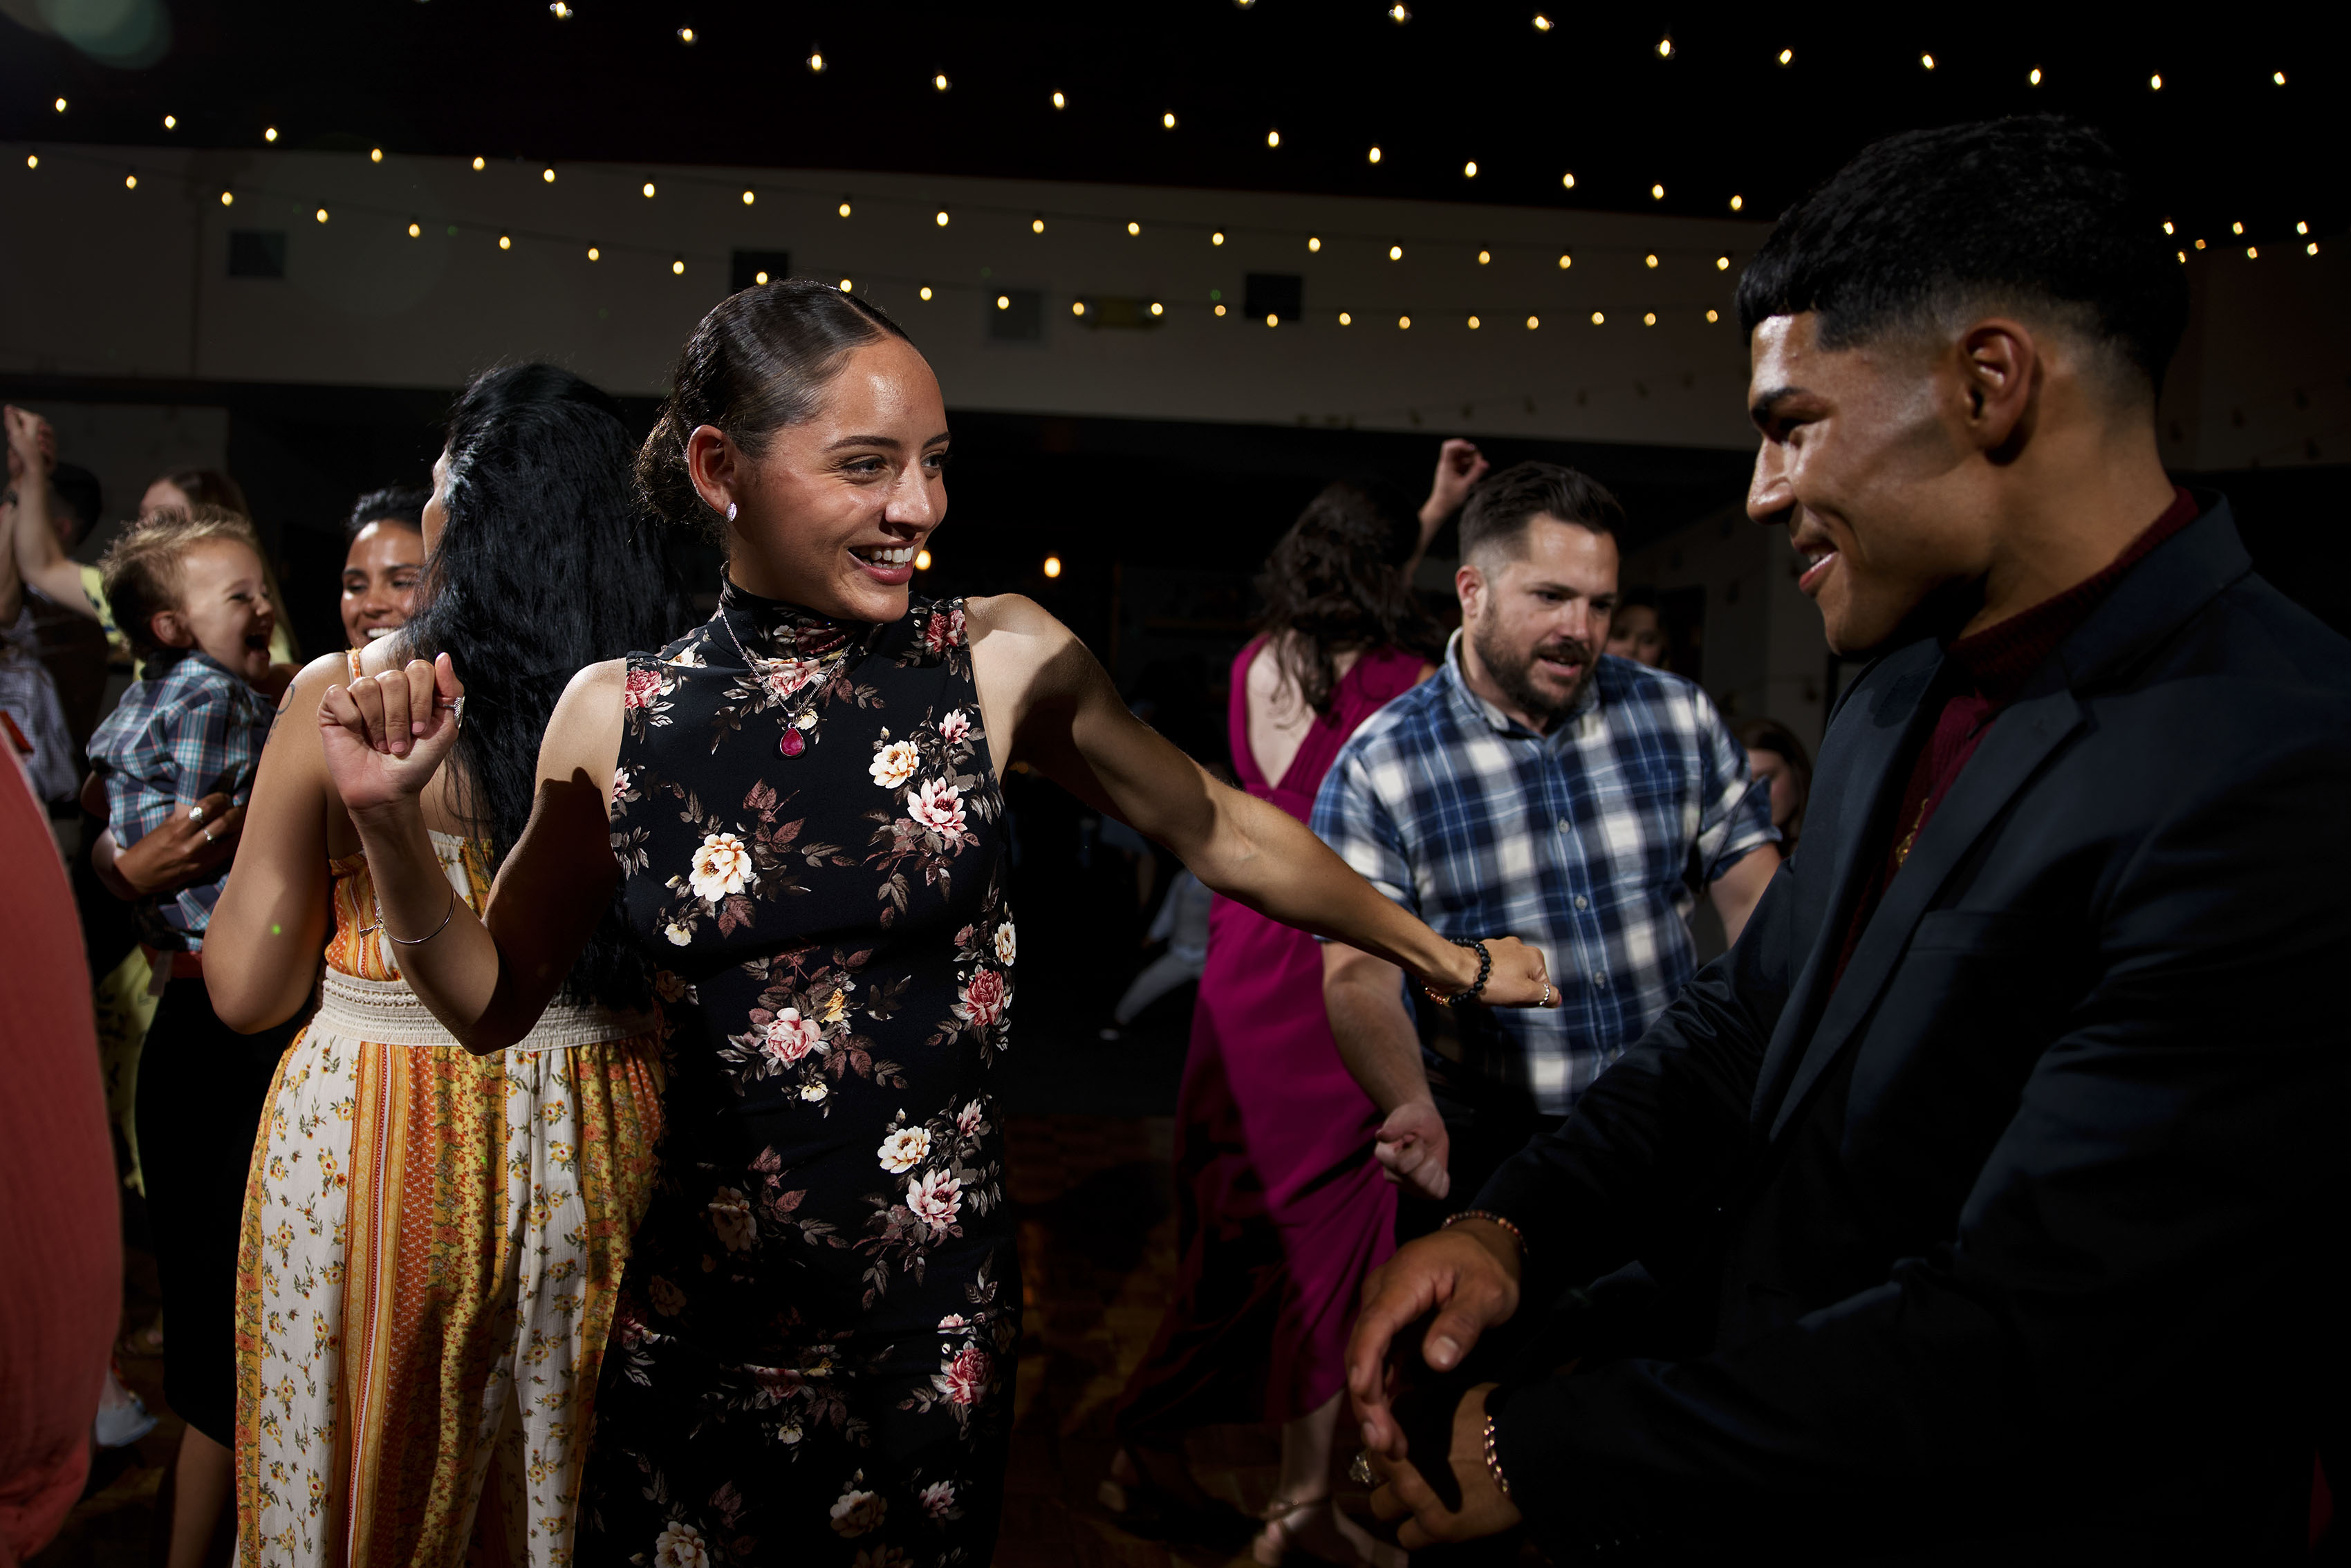 guests dance during a wedding reception at Holy Name Catholic Church